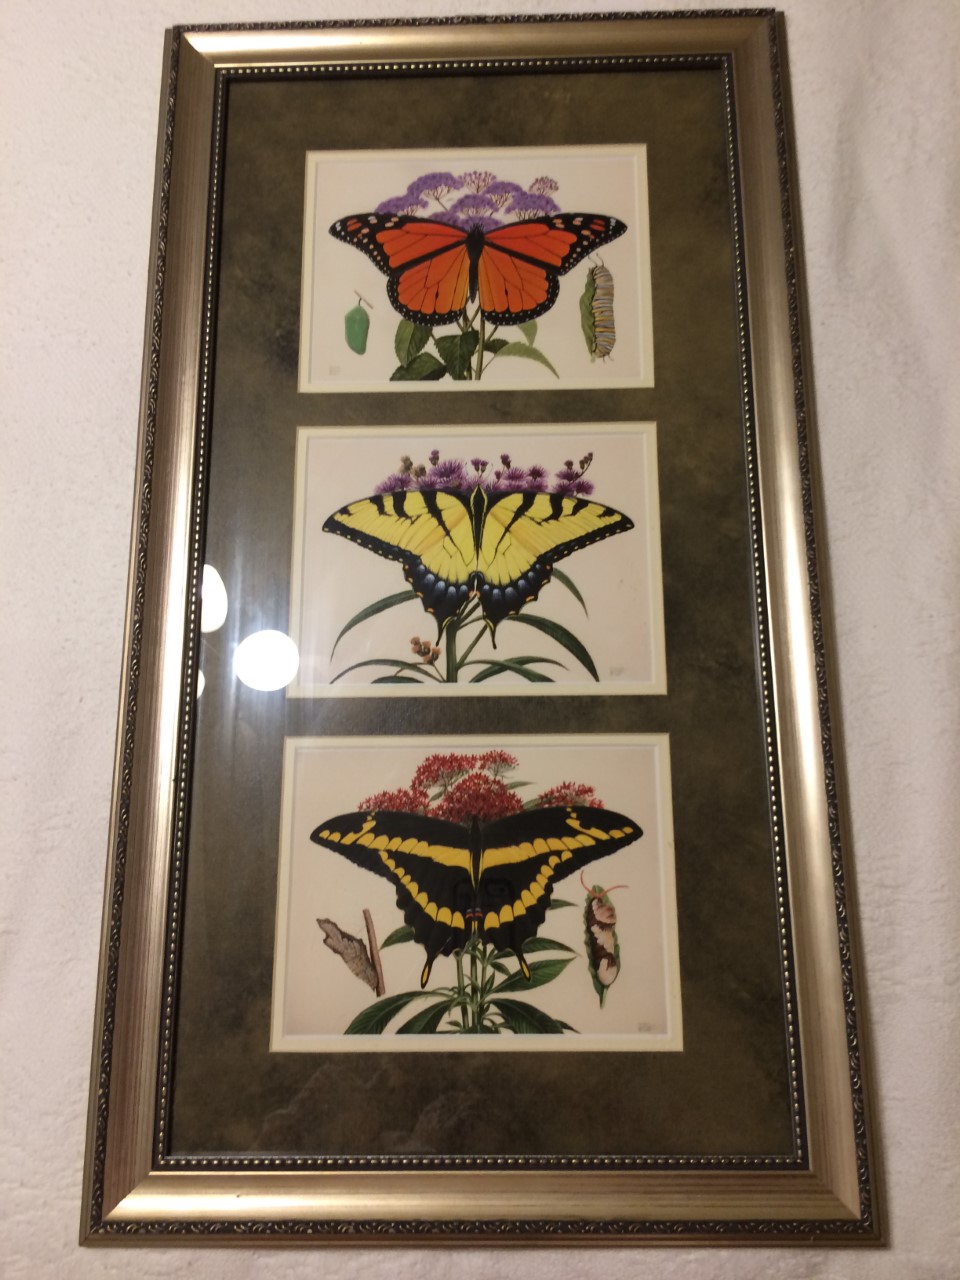 3 paintings in one frame - three butterflies on host plants